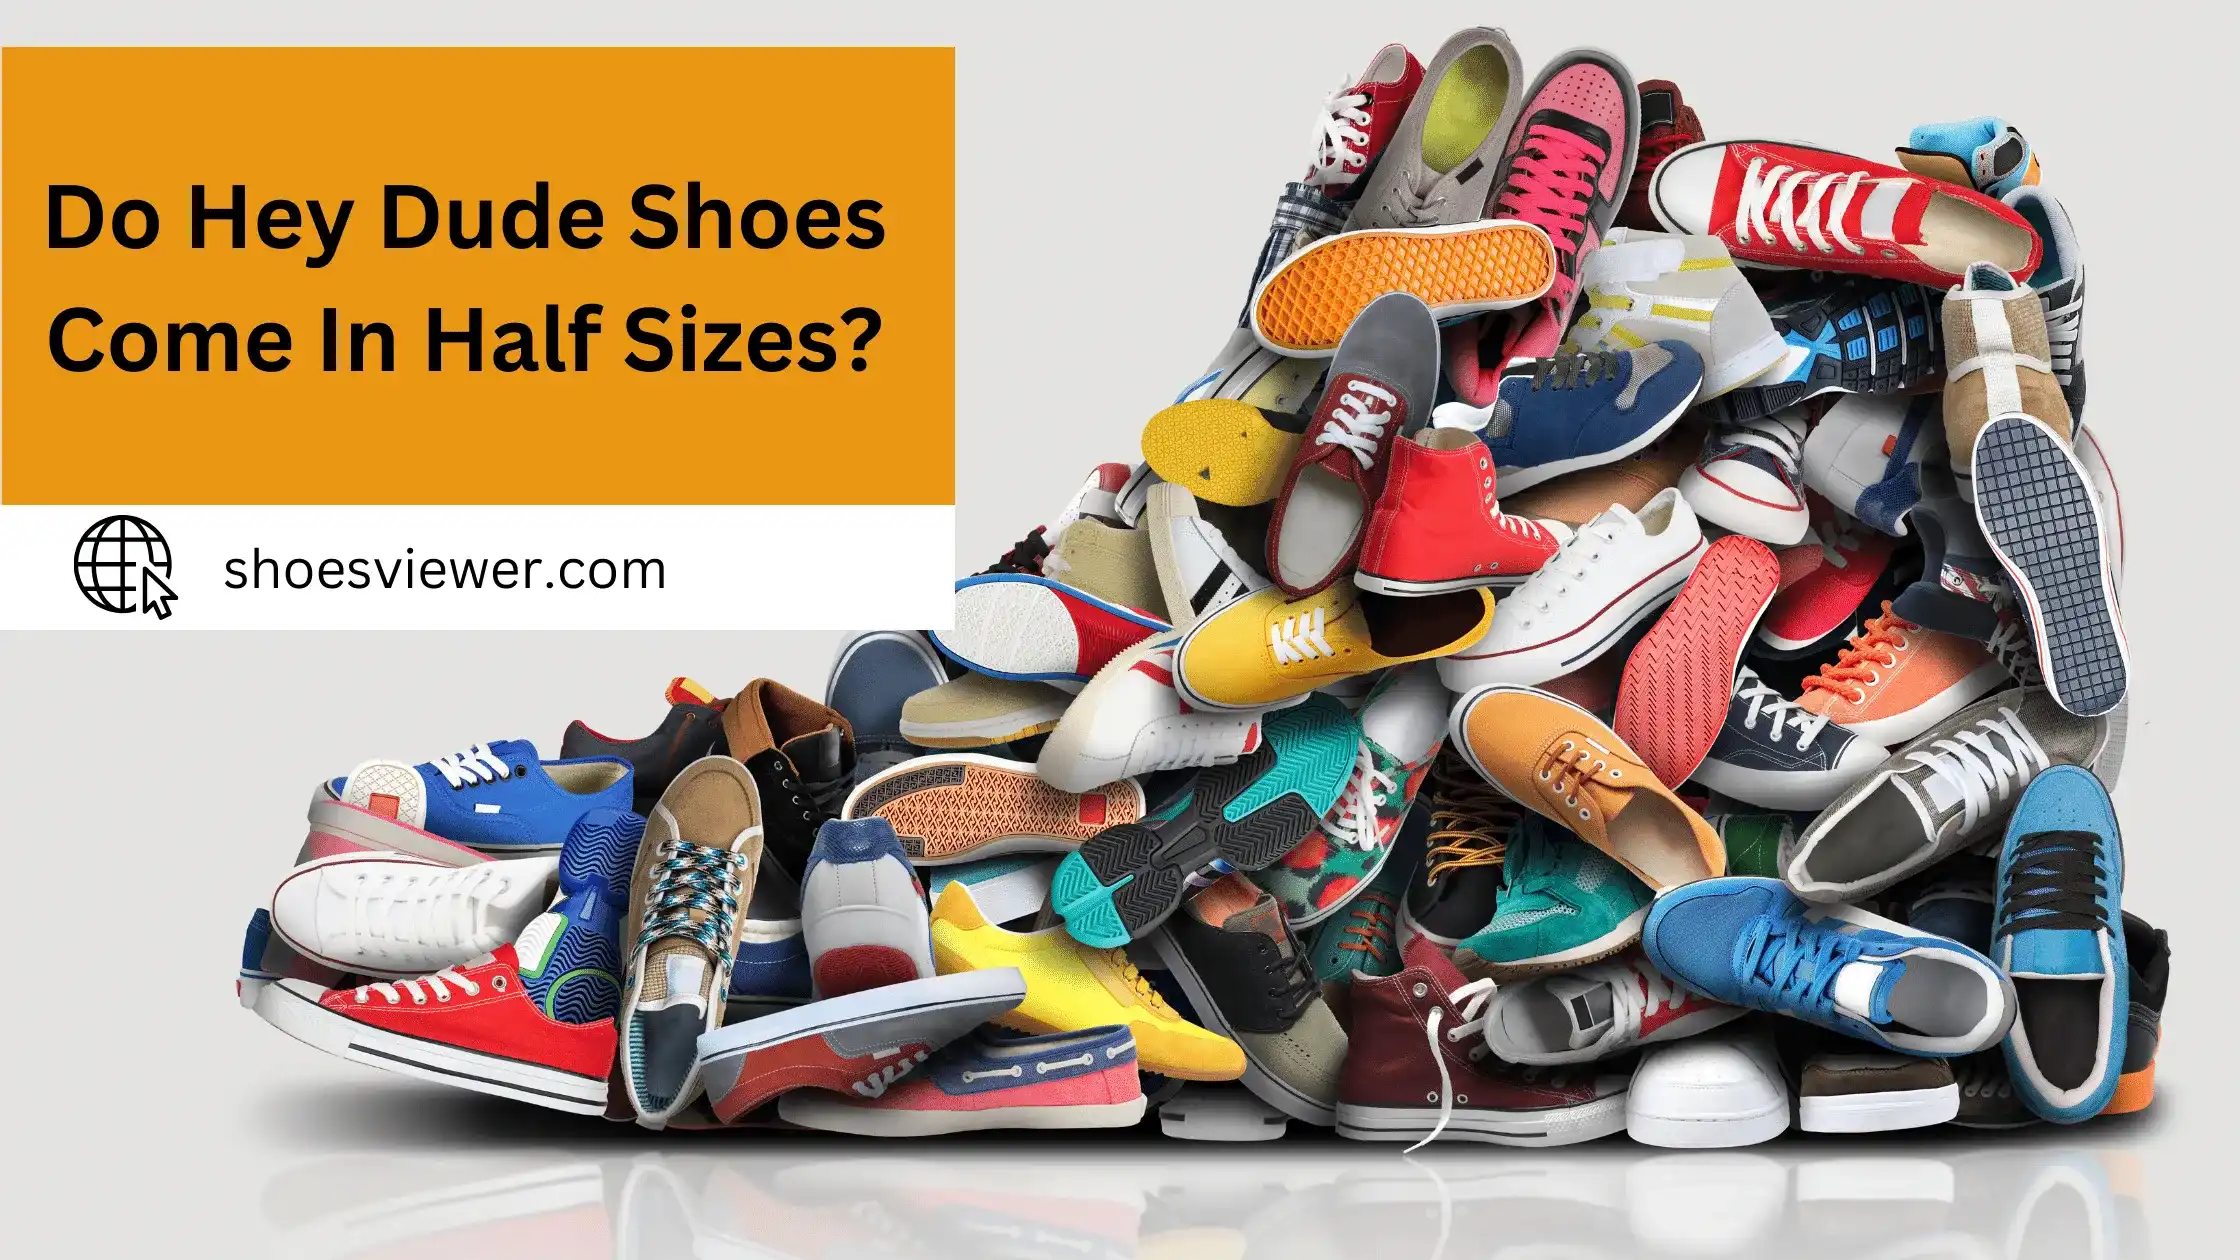 Do Hey Dude Shoes Come In Half Sizes? (An In-Depth Guide)